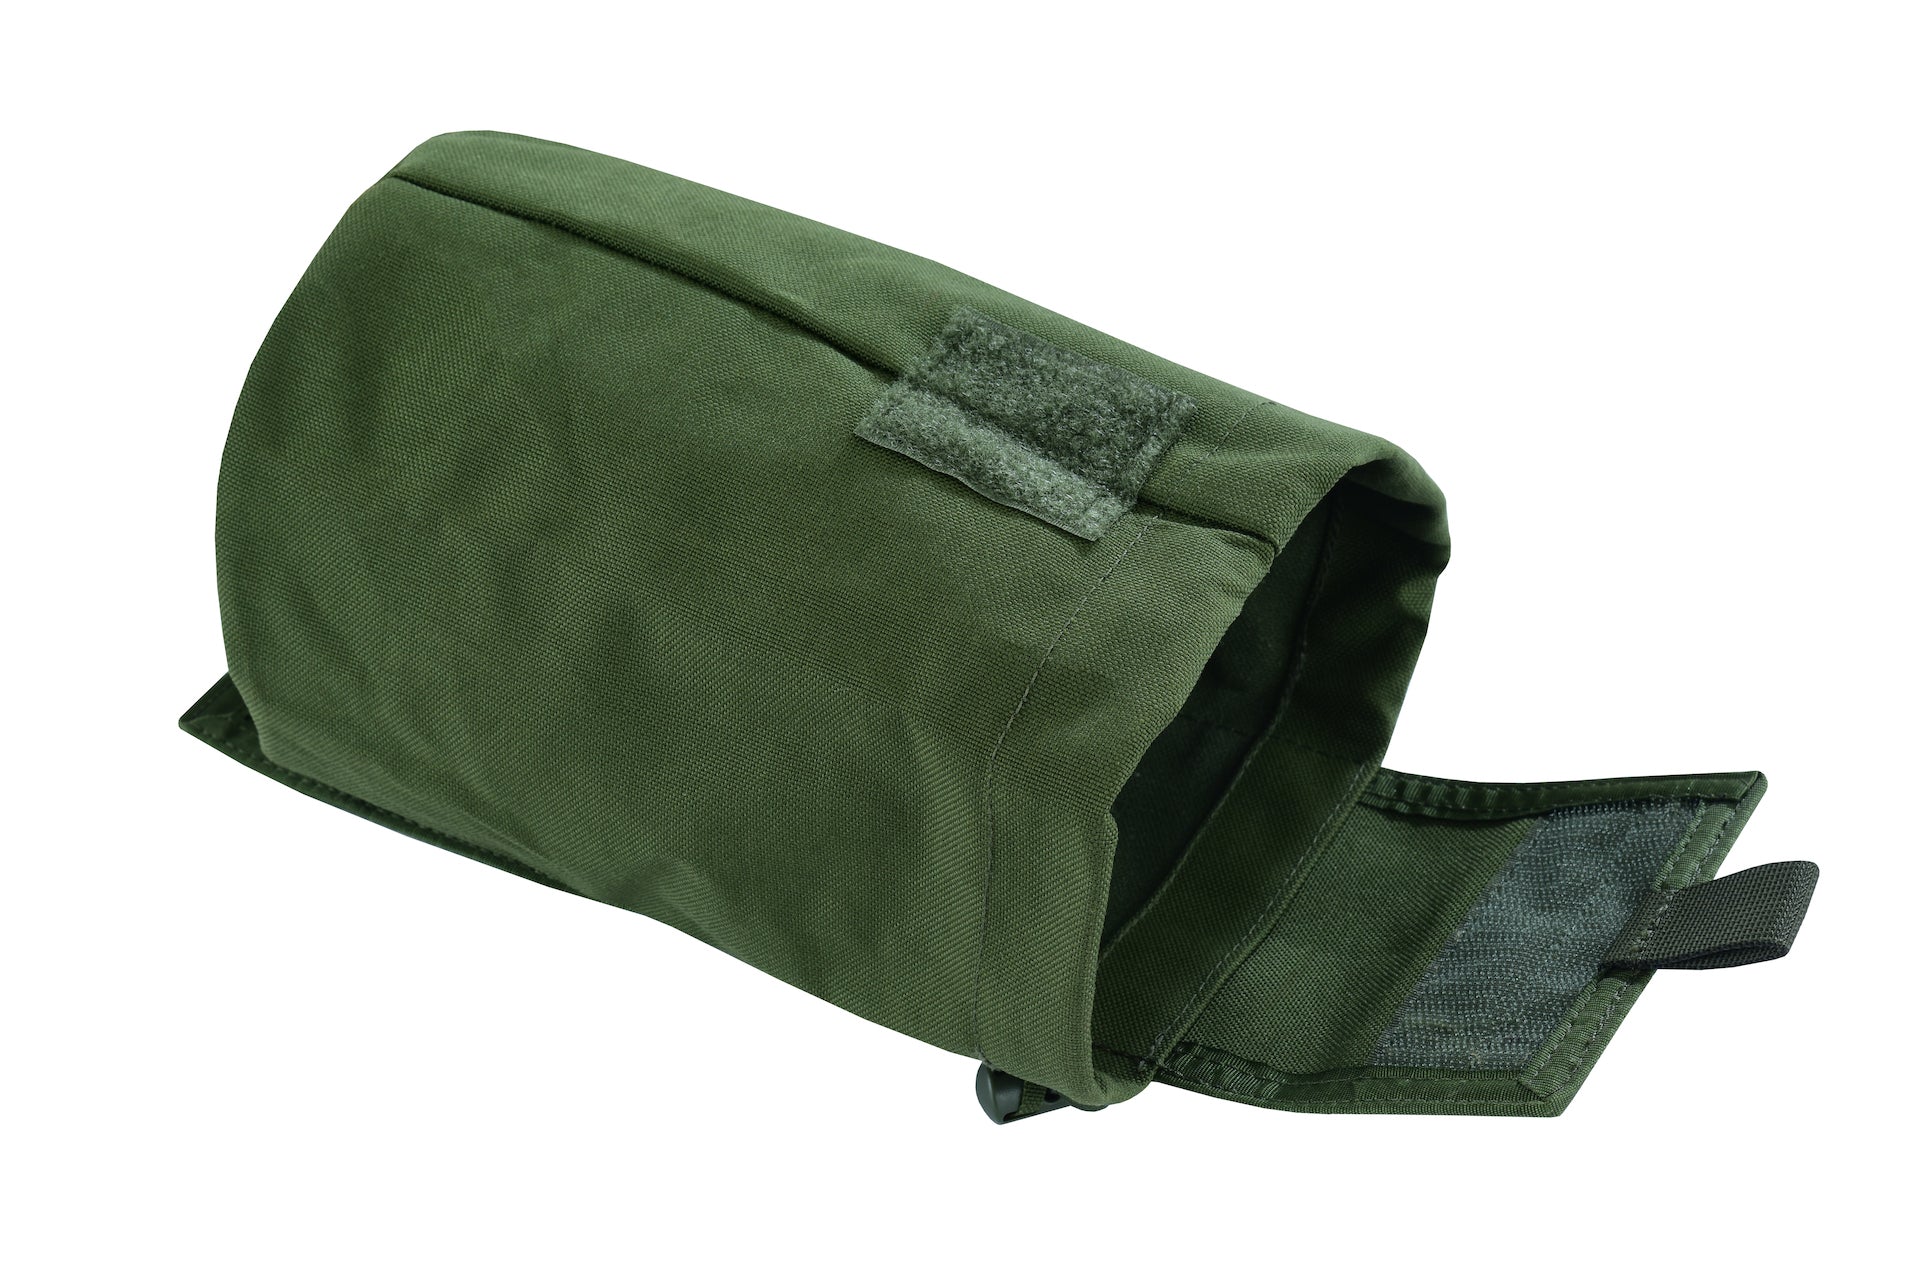 SHE-806 Molle Folding Dump pouch Color OD Green open view